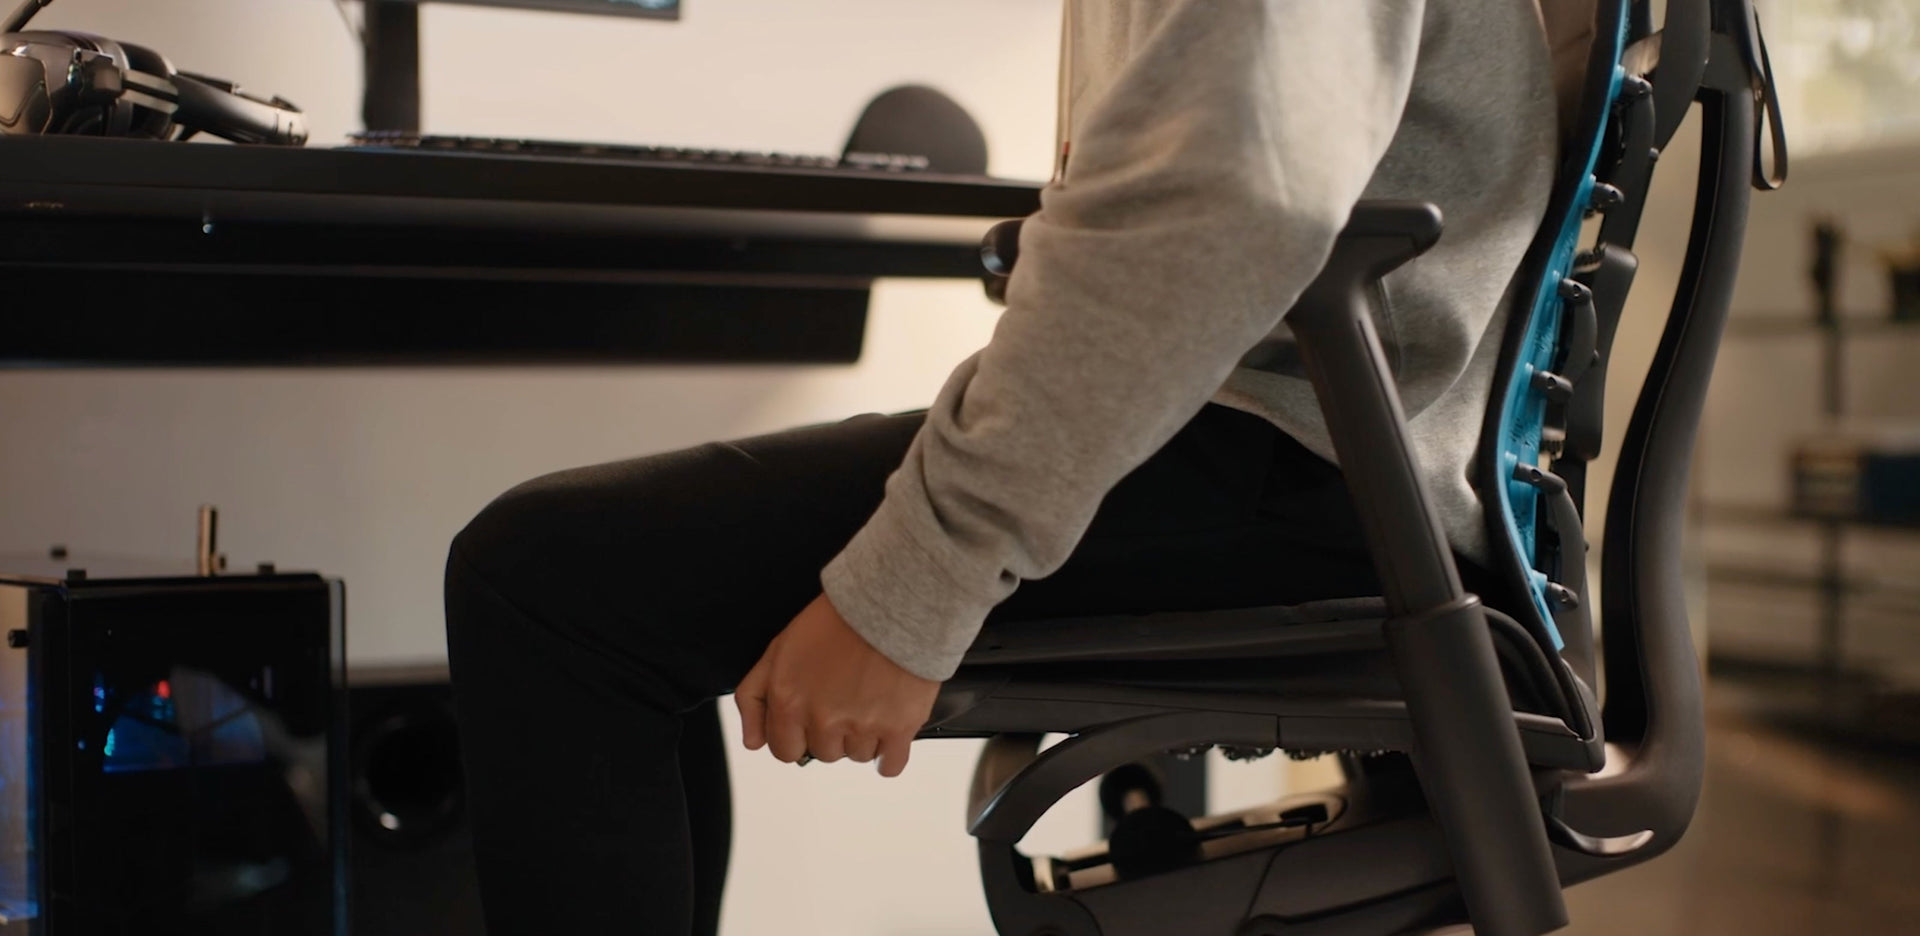 A close-up video of the side of a black Embody Gaming Chair adjustable seat depth mechanism being adjusted by a person in a sweater and trousers.